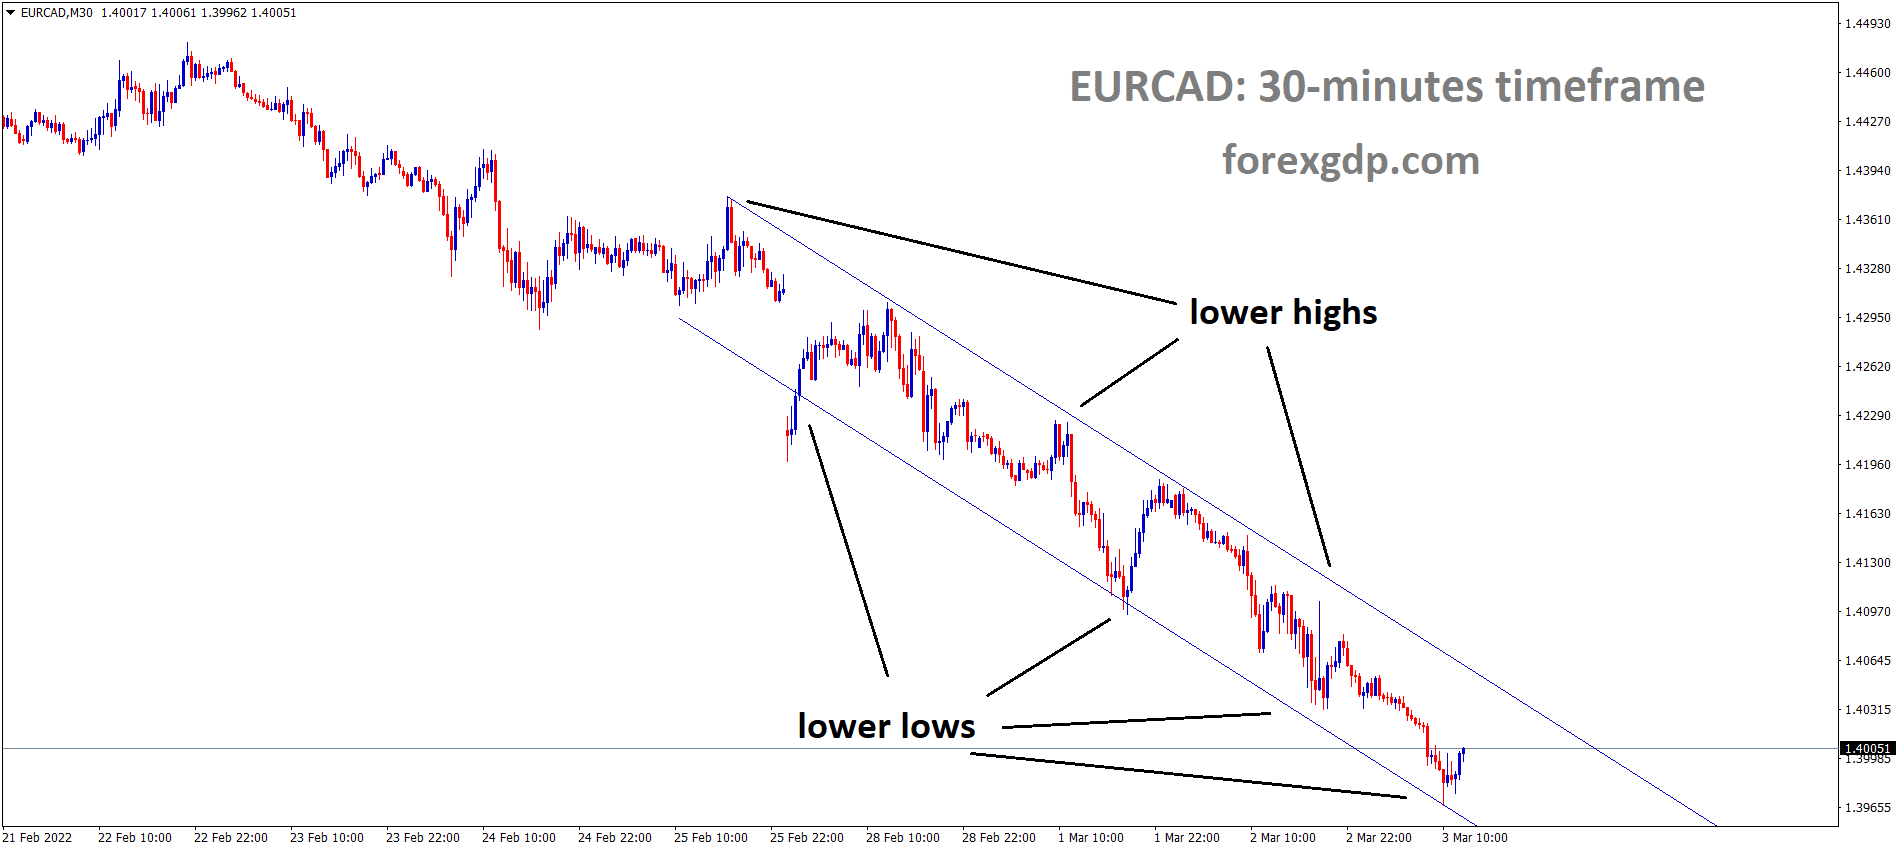 EURCAD is moving in the Descending channel and the market has rebounded from the lower low area of the channel.